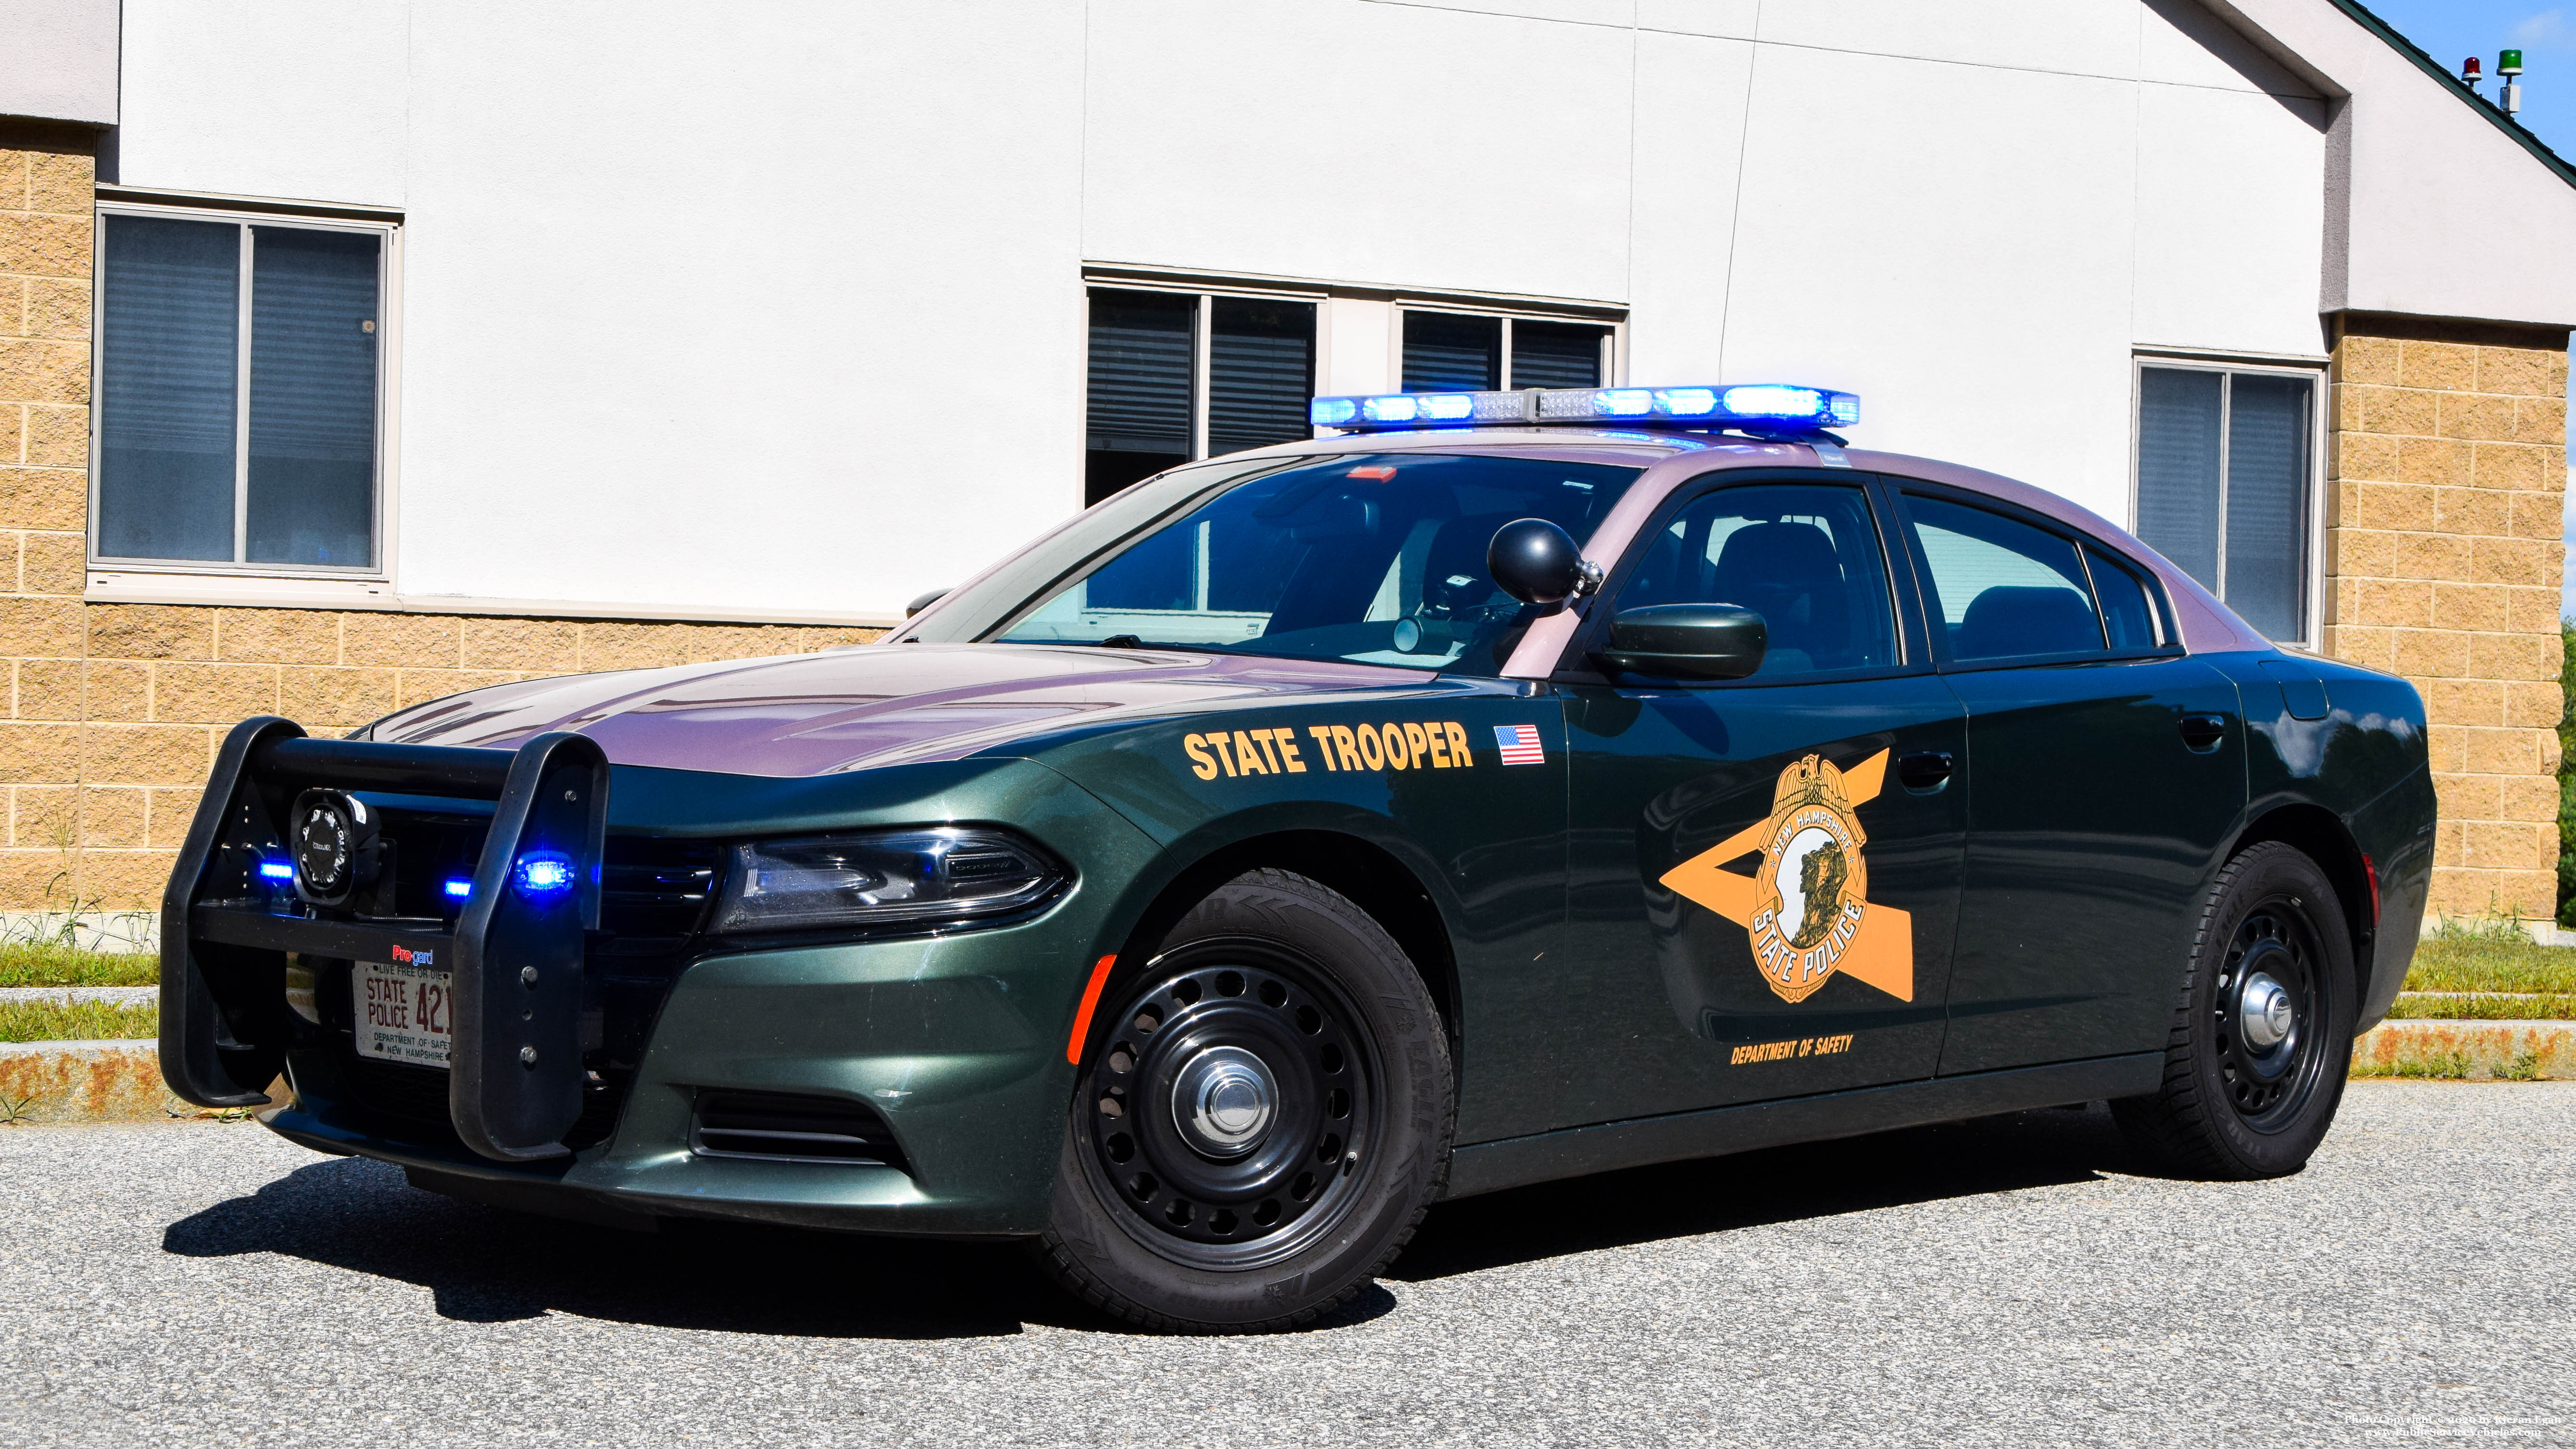 A photo  of New Hampshire State Police
            Cruiser 421, a 2016 Dodge Charger             taken by Kieran Egan